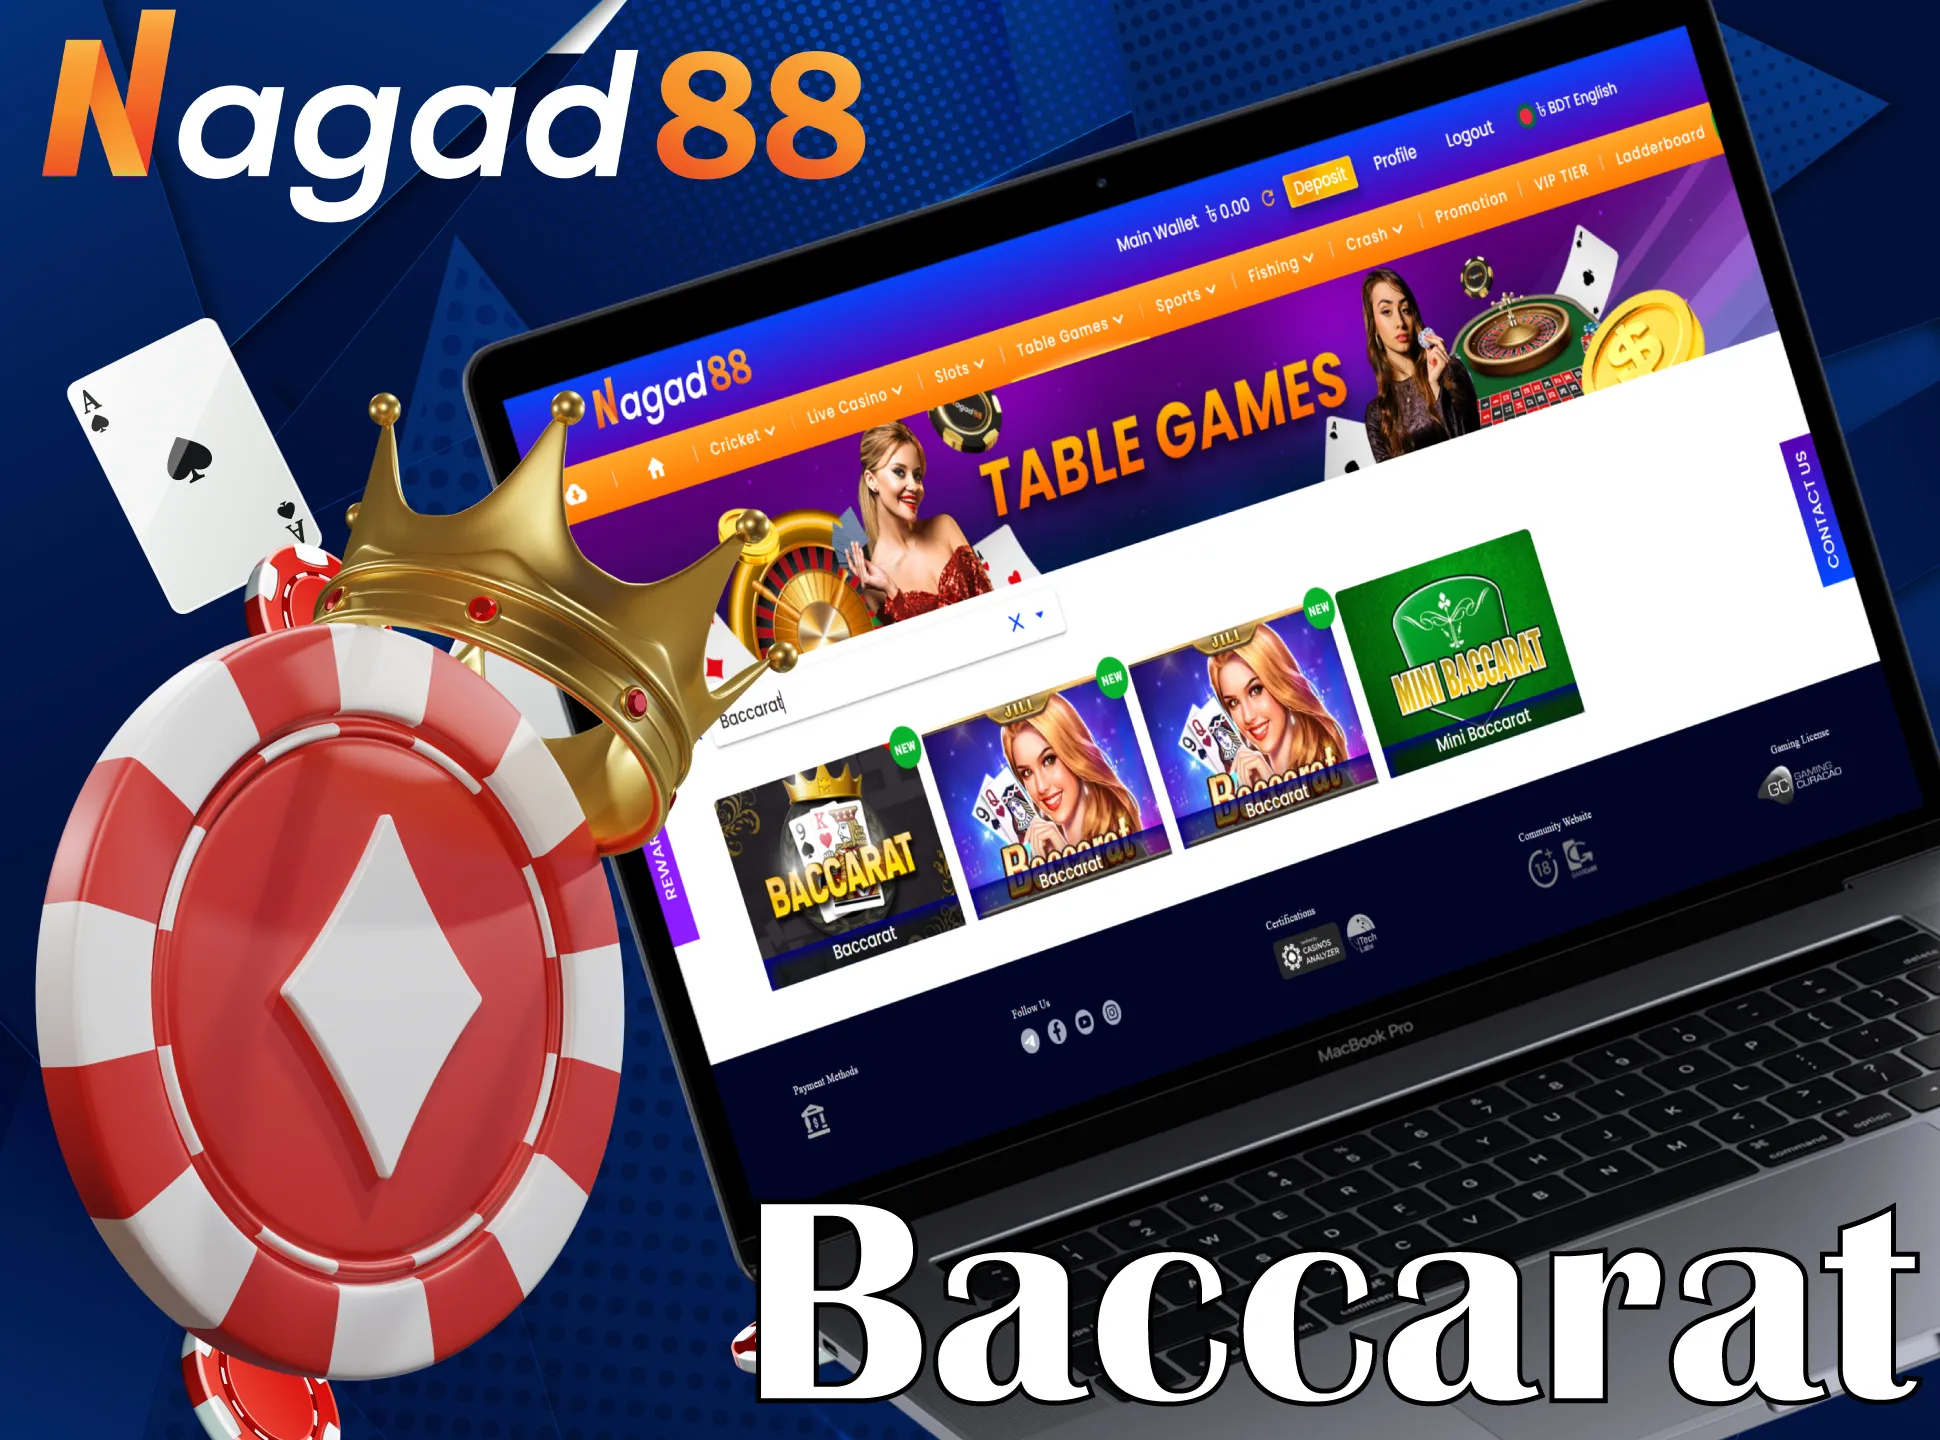 With Nagad88 casino you have the opportunity to play baccarat.